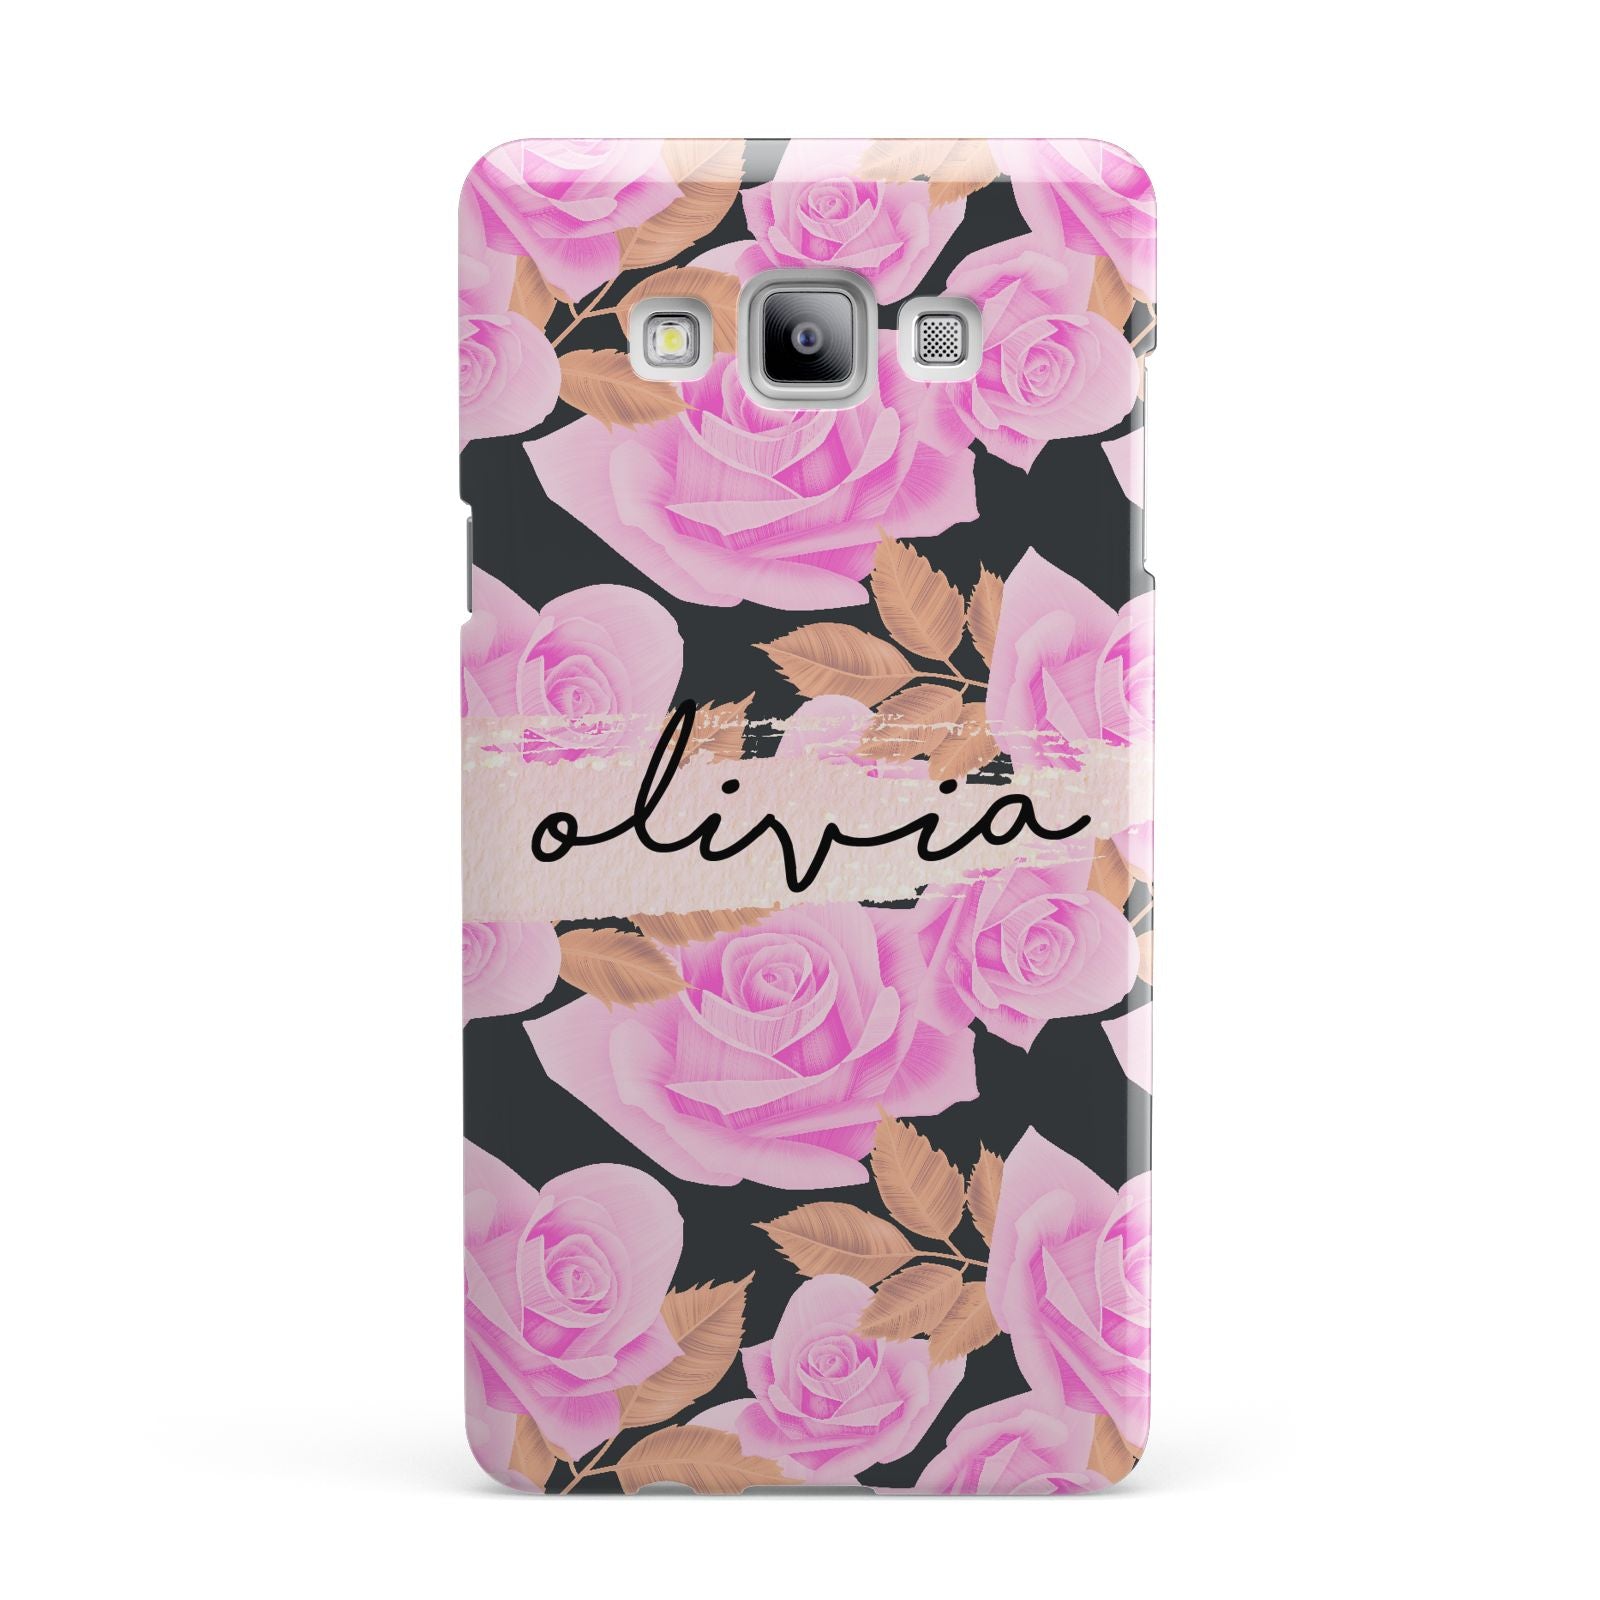 Personalised Floral Pink Roses Samsung Galaxy A7 2015 Case